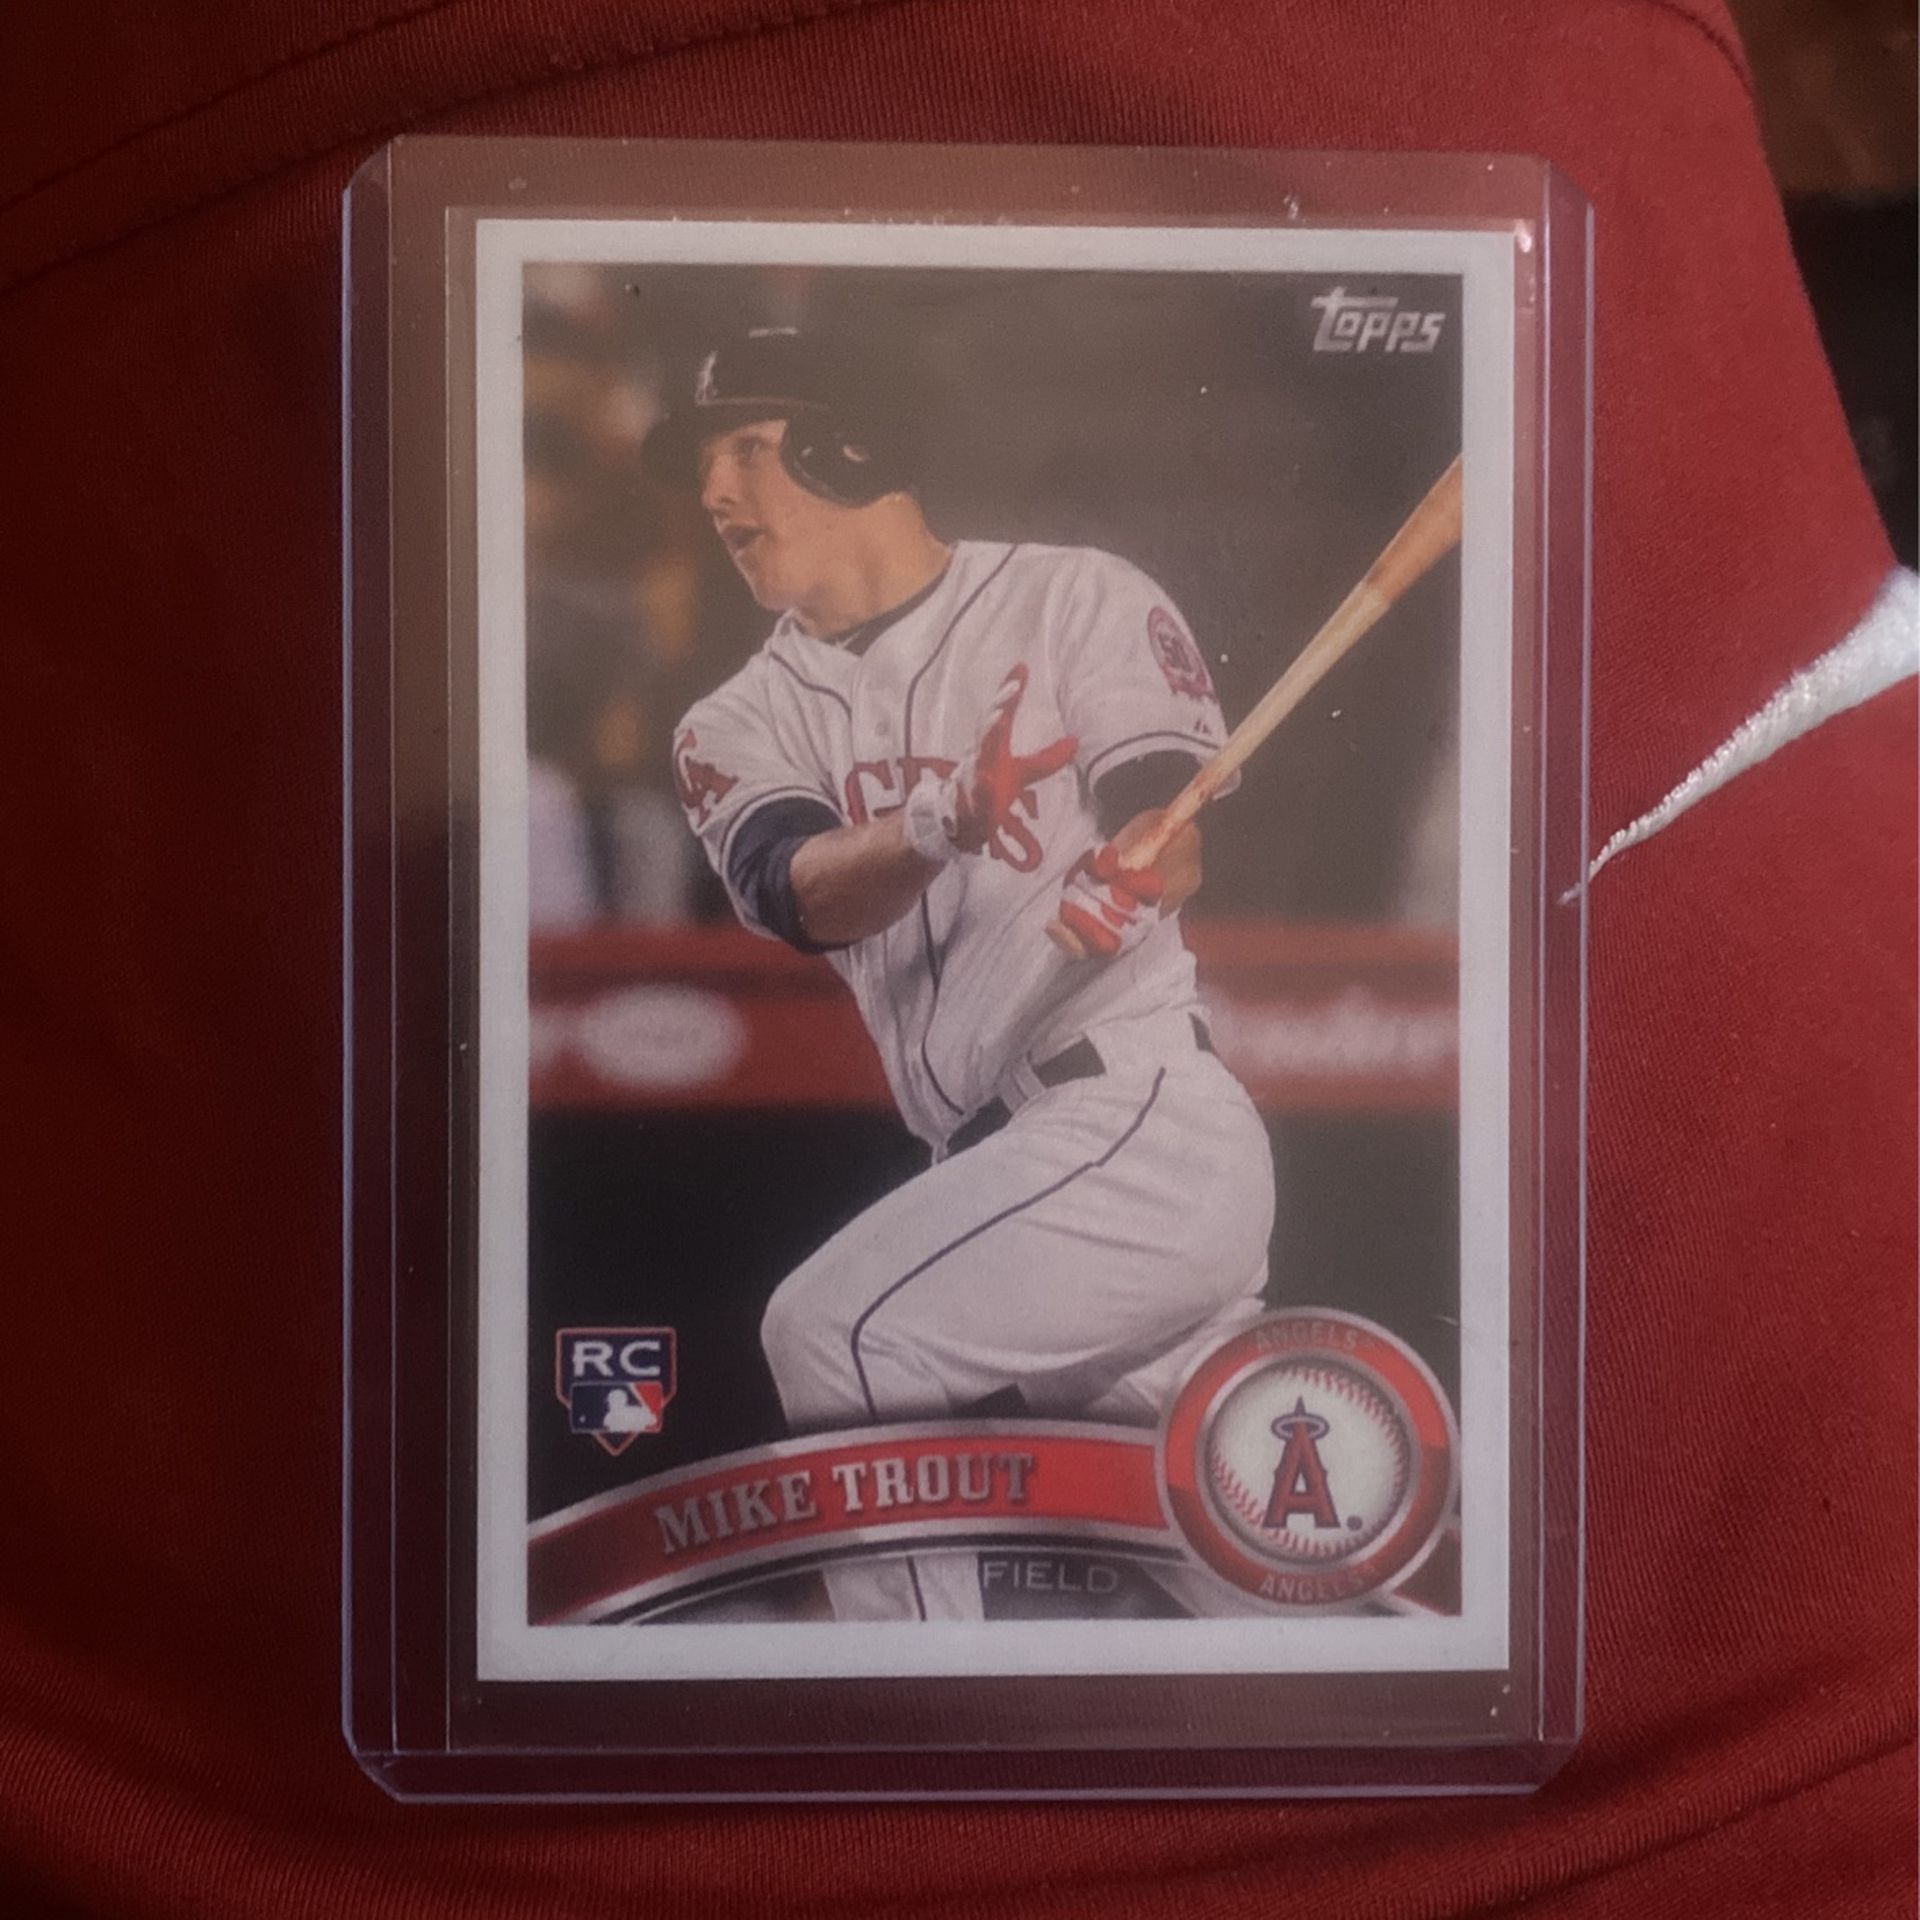 2011 Topps Mike Trout Rookie Card 